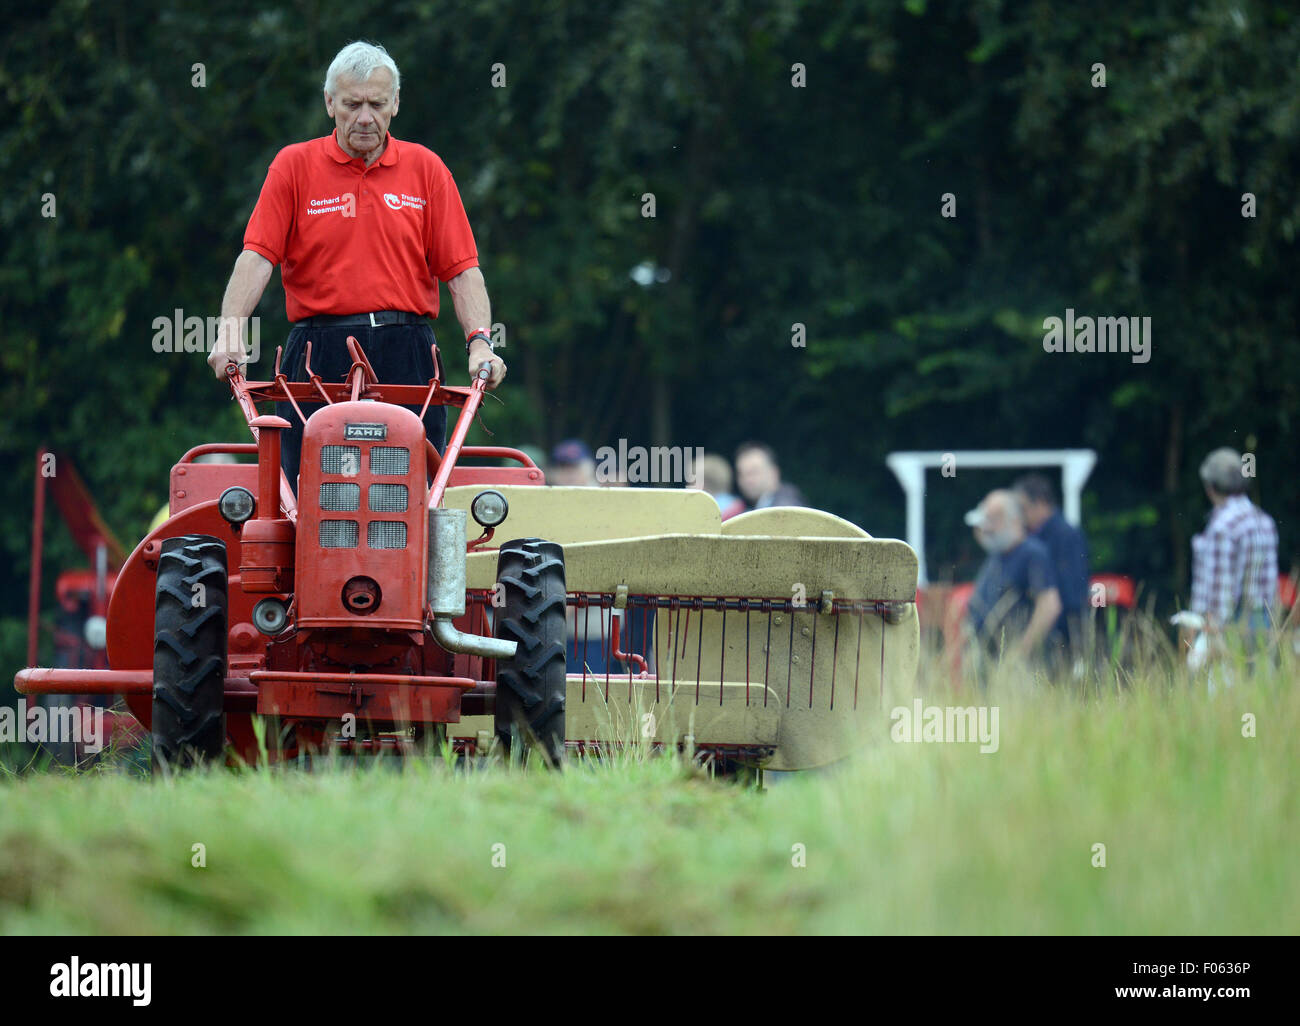 Nordhorn, Germany. 8th Aug, 2015. Gerhard Hoesmann from the Treckerclub Nordhorn on a Fahr tractor at the 23rd Historical Field Days in Nordhorn, Germany, 8 August 2015. 1600 exhibitors are expected to bring 2000 tractors to this year's agricultural machinery show, which has a special focus on machines produced by Deutz. PHOTO: CAROLINE SEIDEL/DPA/Alamy Live News Stock Photo